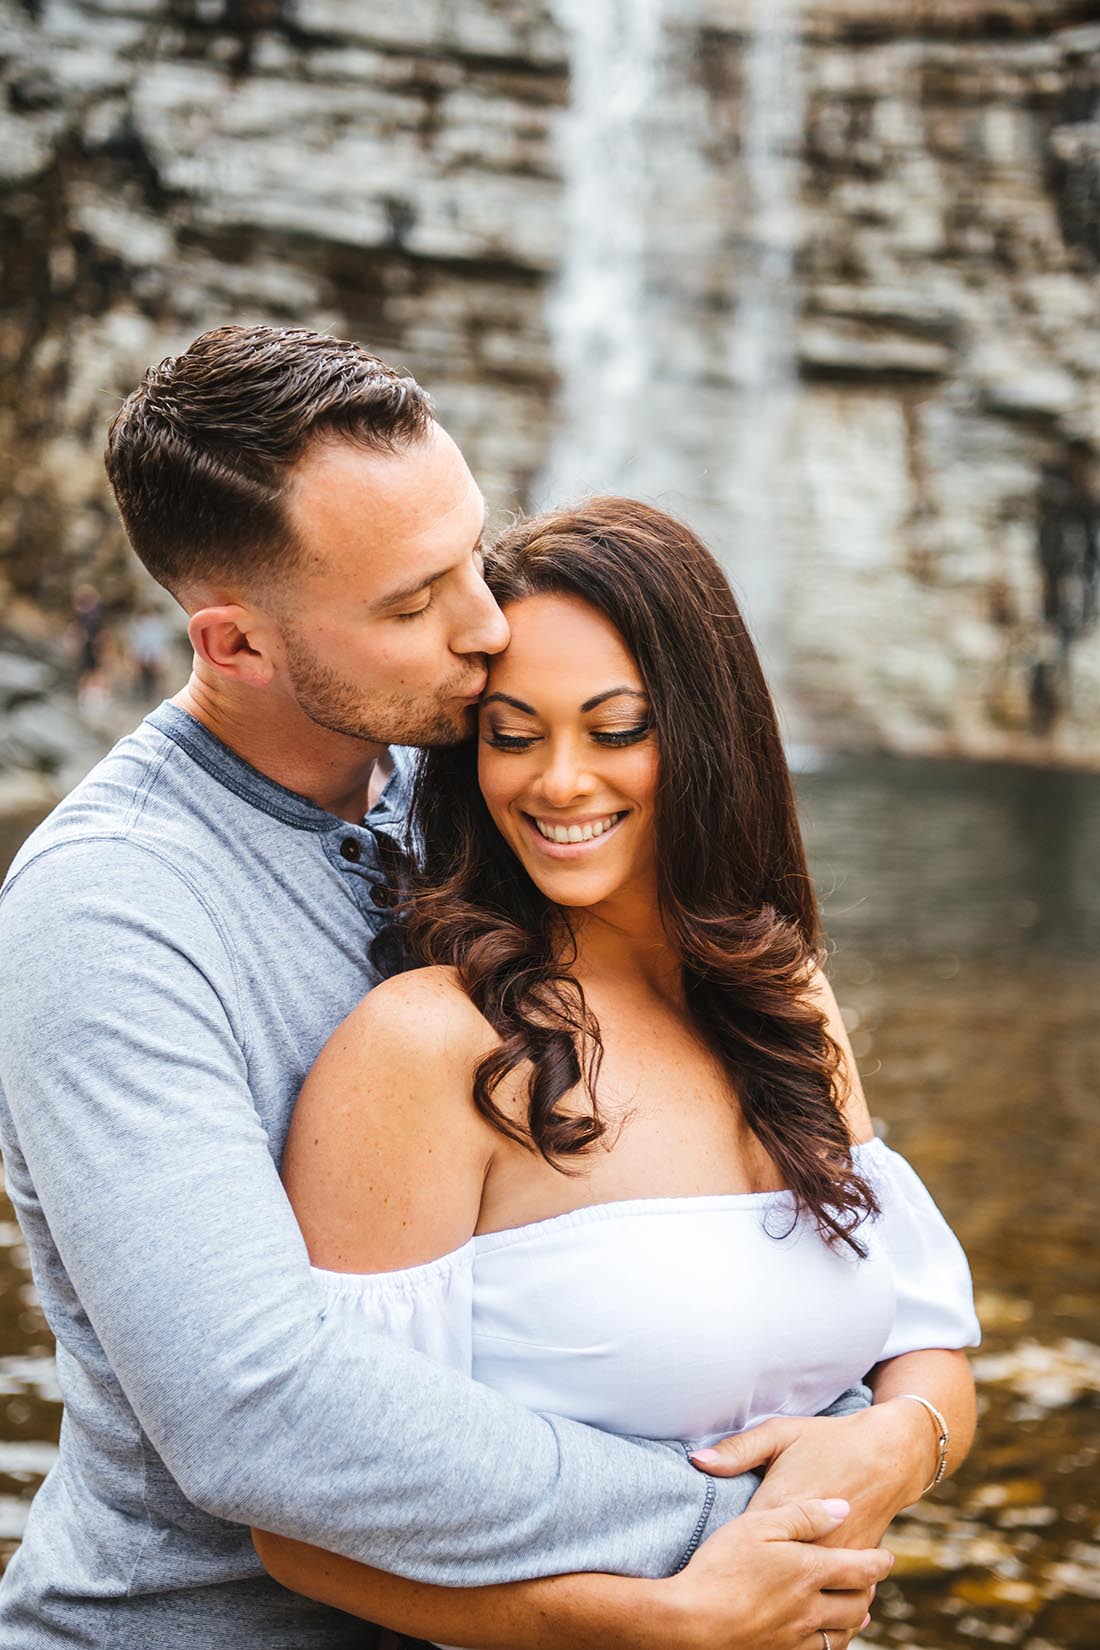 Awosting Falls engagement session